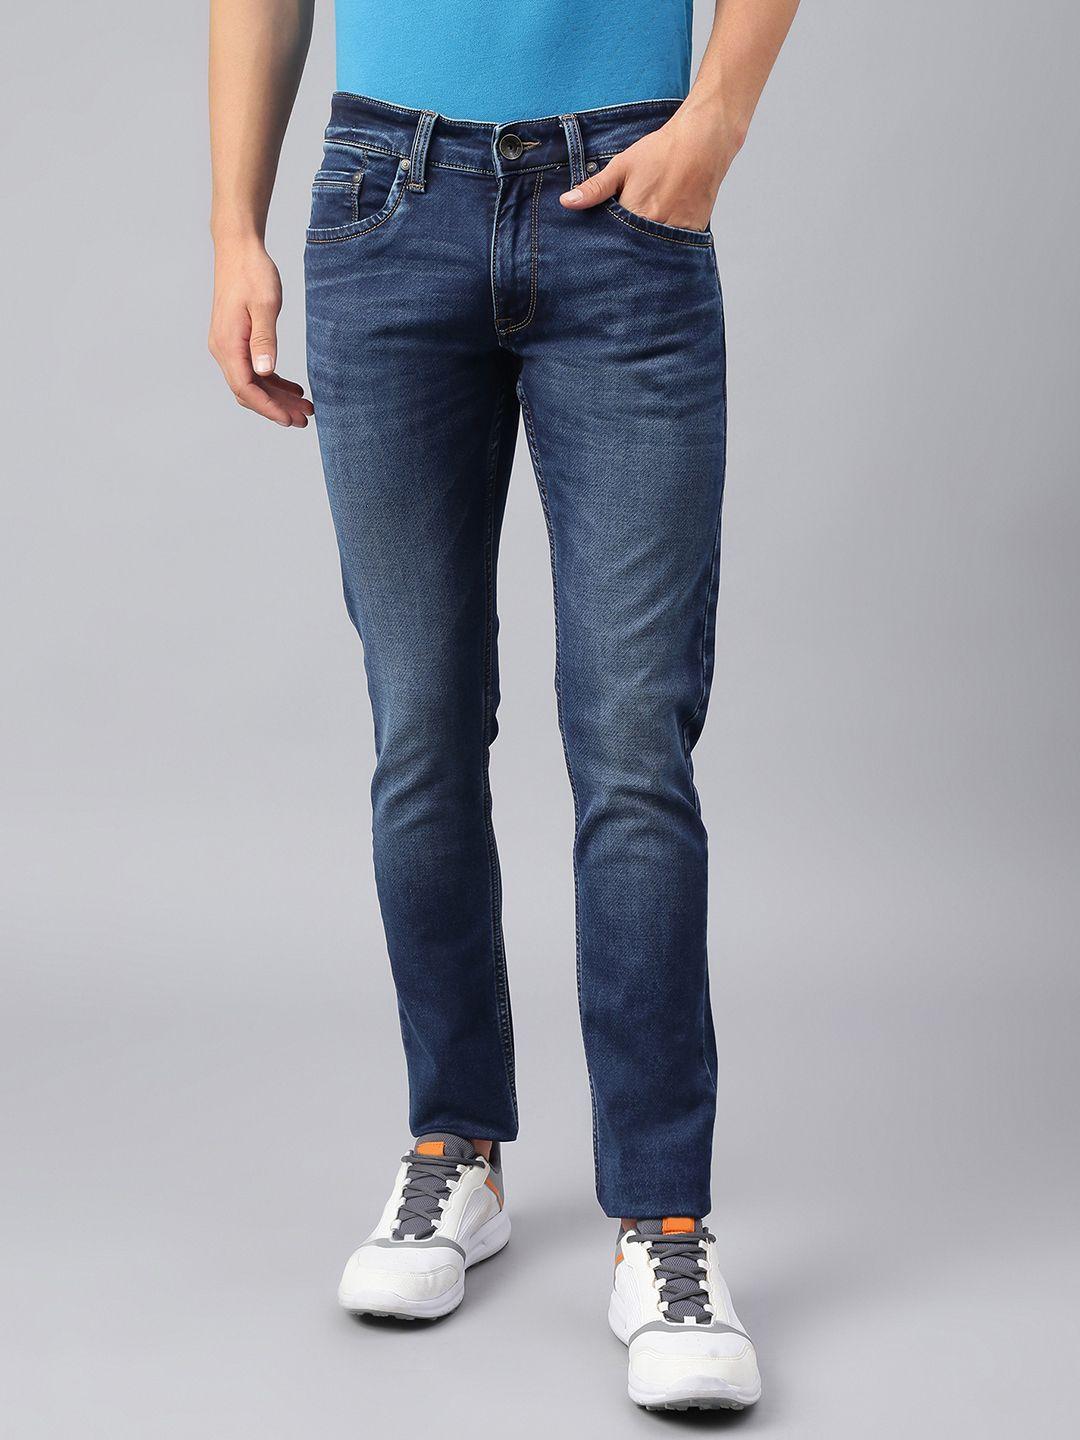 beverly-hills-polo-club-men-skinny-fit-light-fade-jeans